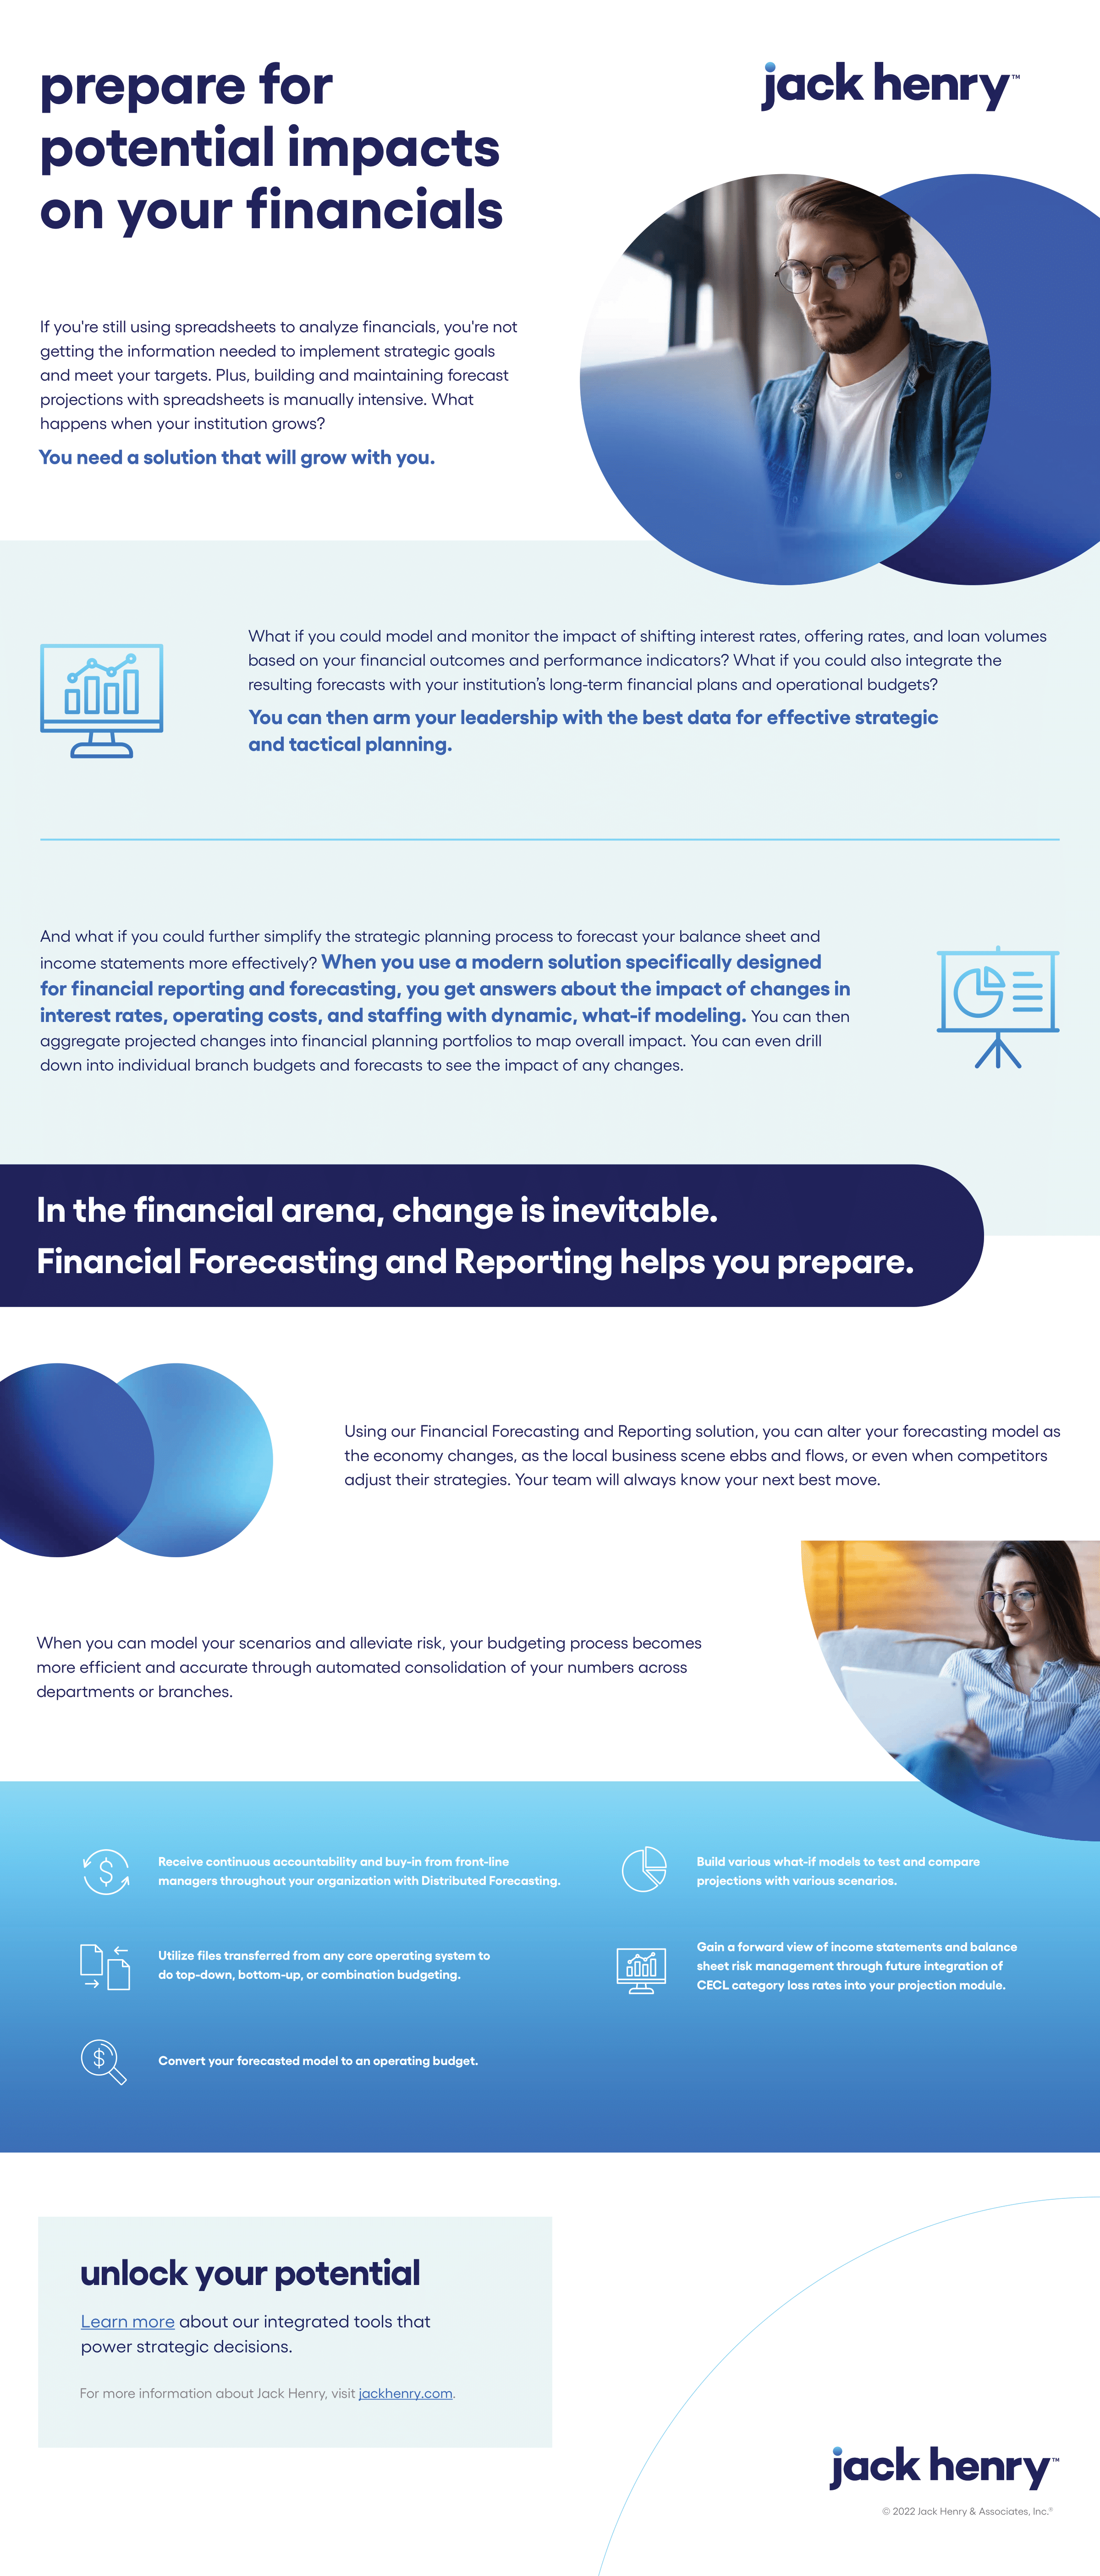 JH-FinancialOperations-PrepareForPotentialImpacts-Infographic-1